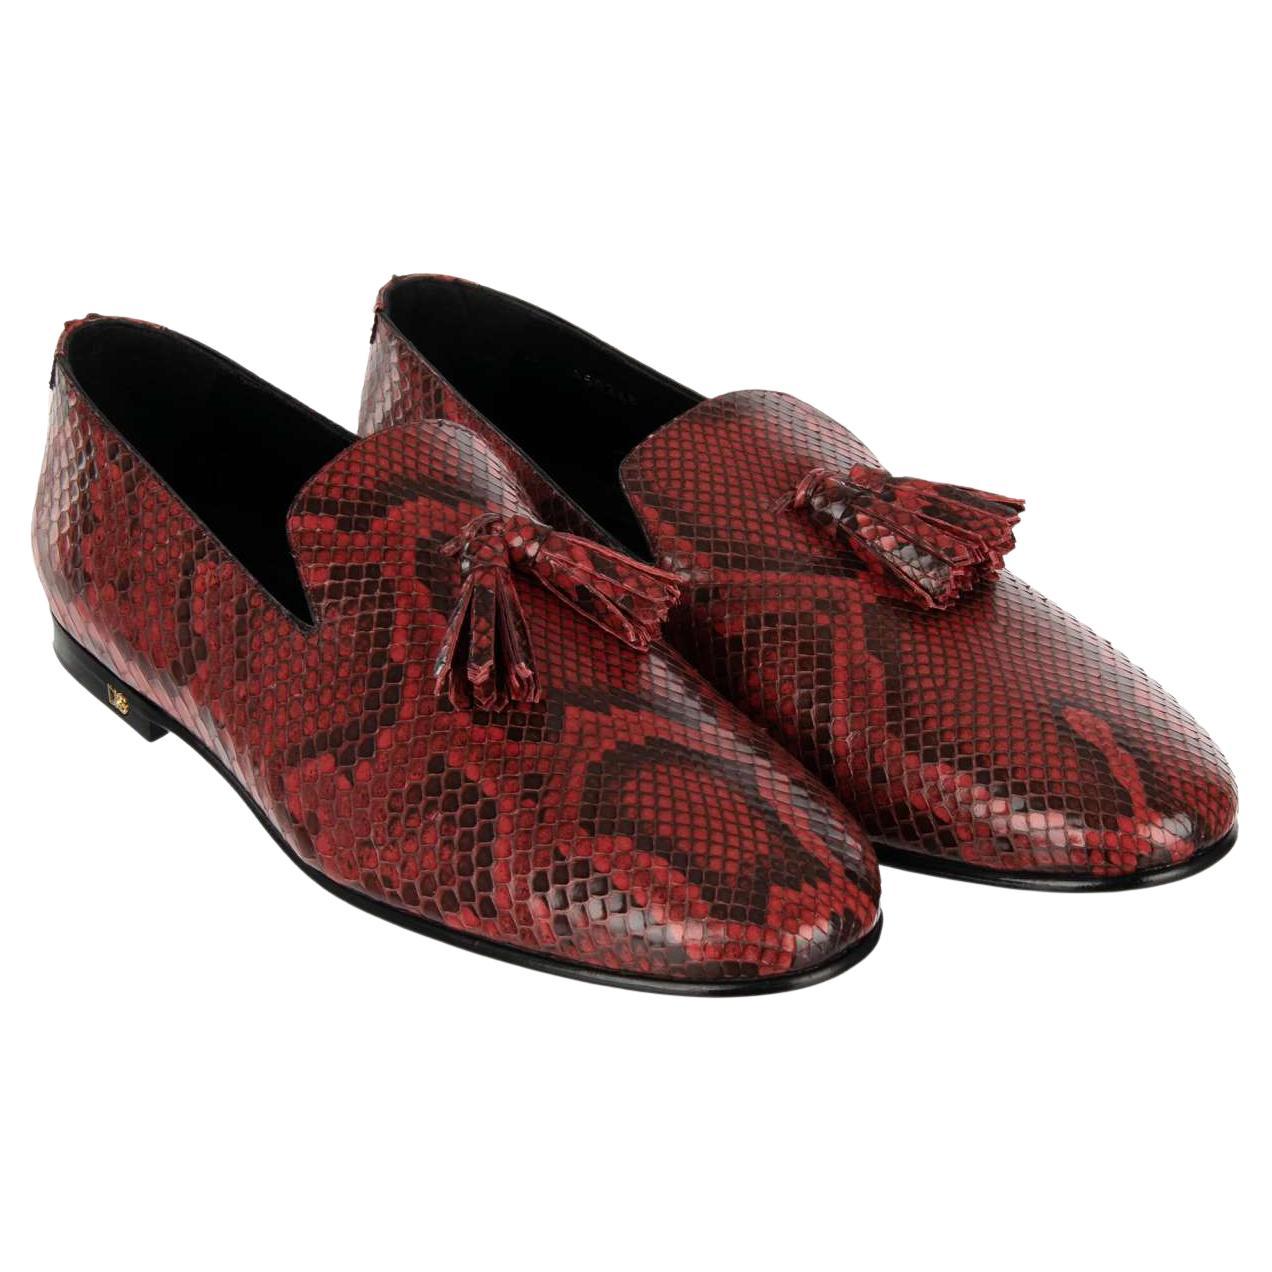 Dolce & Gabbana Snake Tassel Shoes Loafer YOUNG POPE Red 44 UK 10 US 11 For Sale